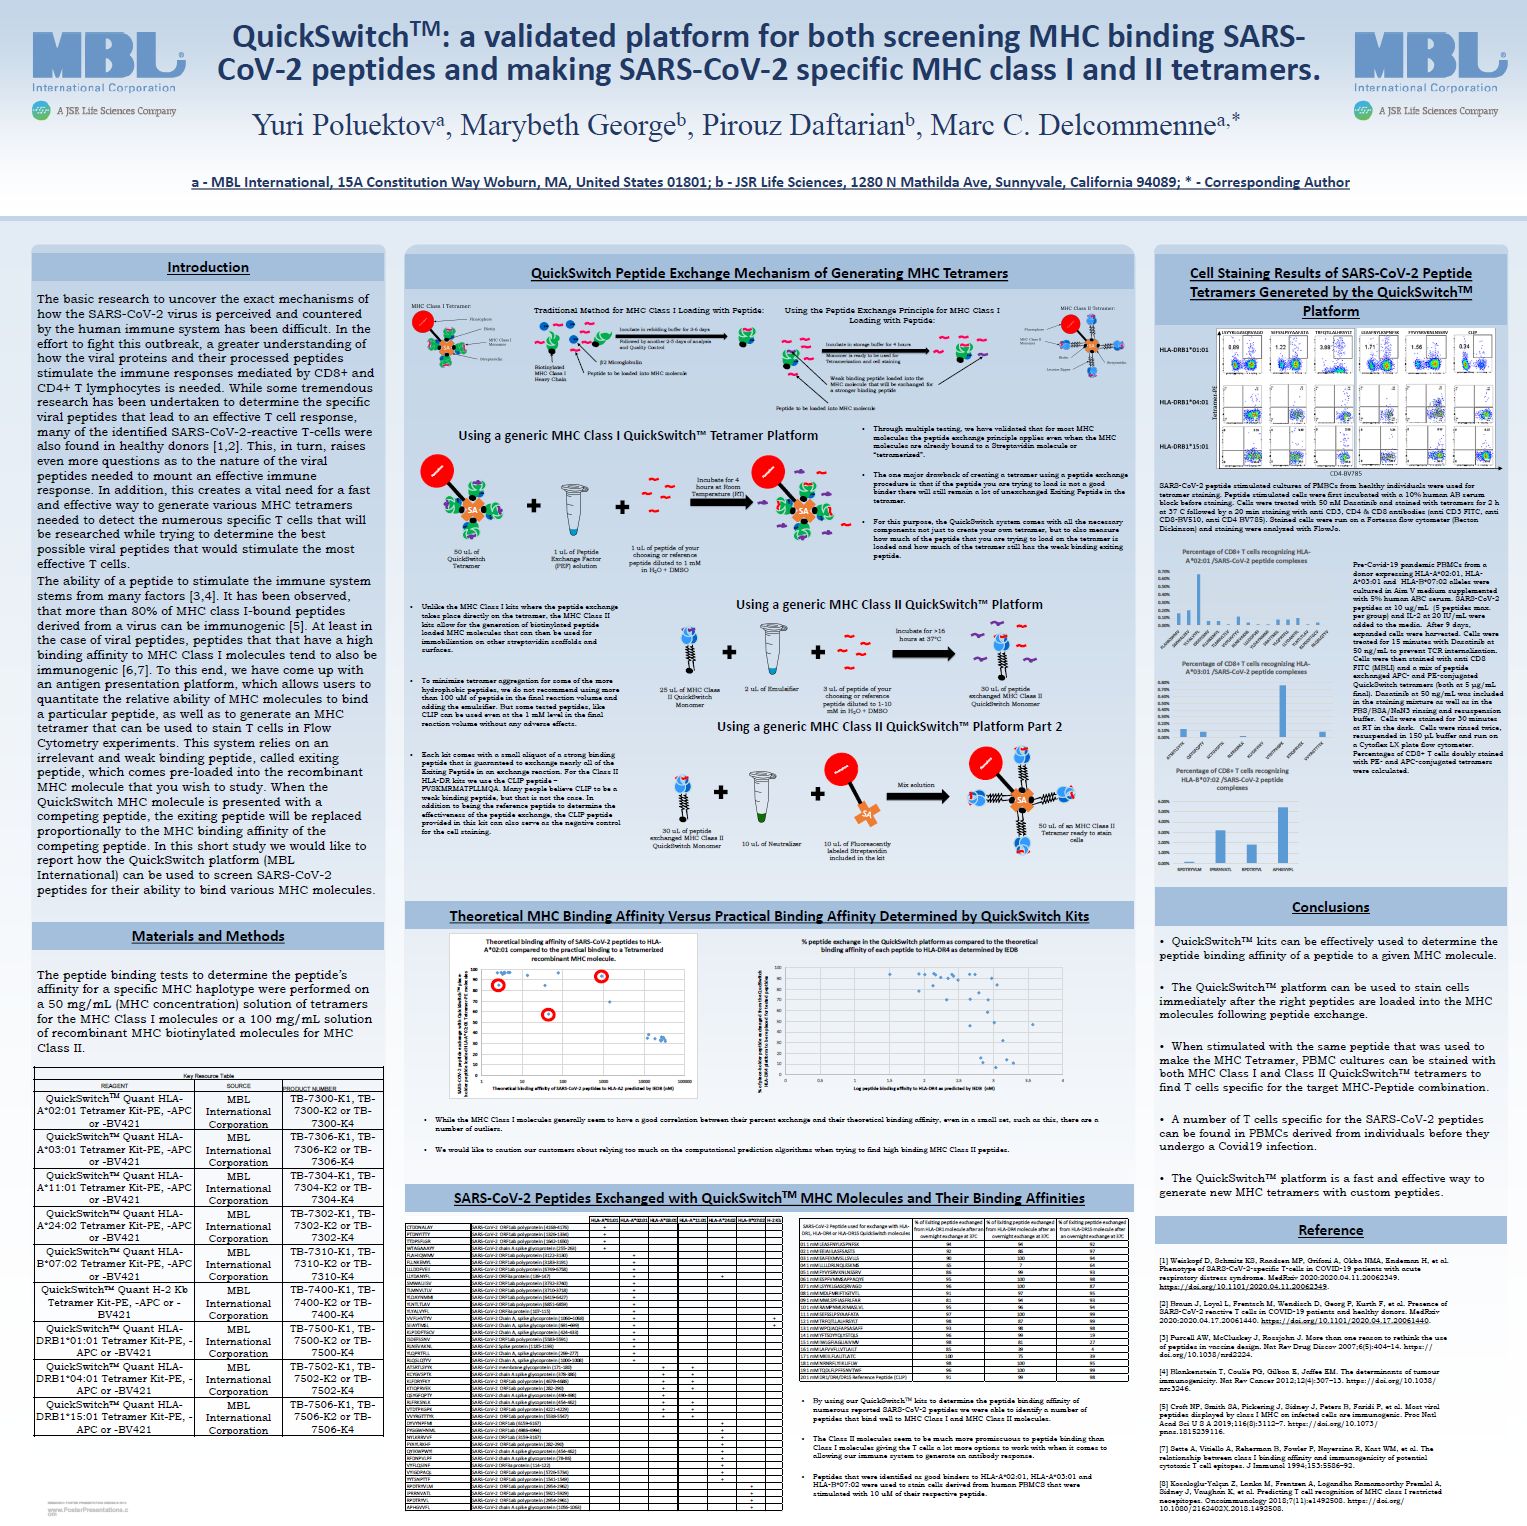 Scientific Poster: QuickSwitch™: a validated platform for both screening MHC binding SARS-CoV-2 peptides and making SARS-CoV-2 specific MHC class I and II tetramers